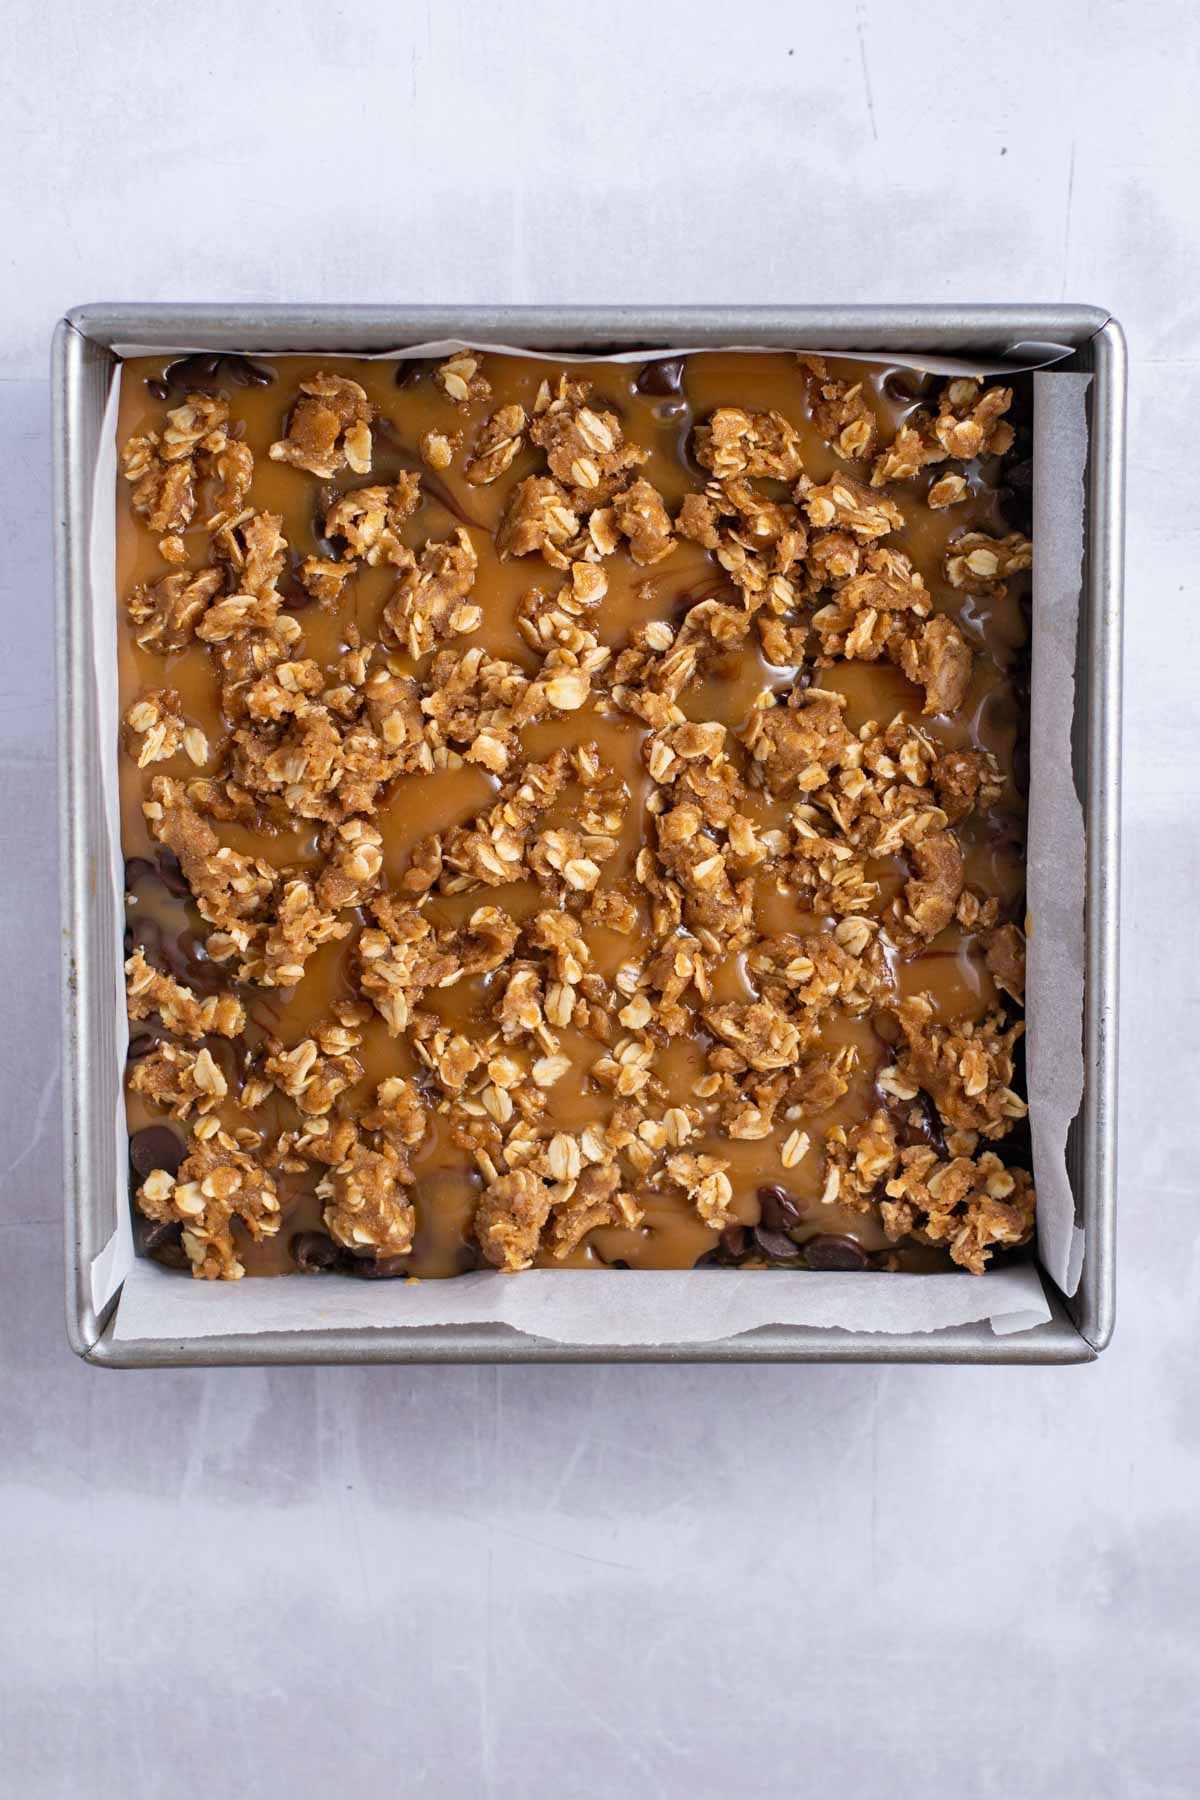 oat topping sprinkled over the caramel and chocolate layer